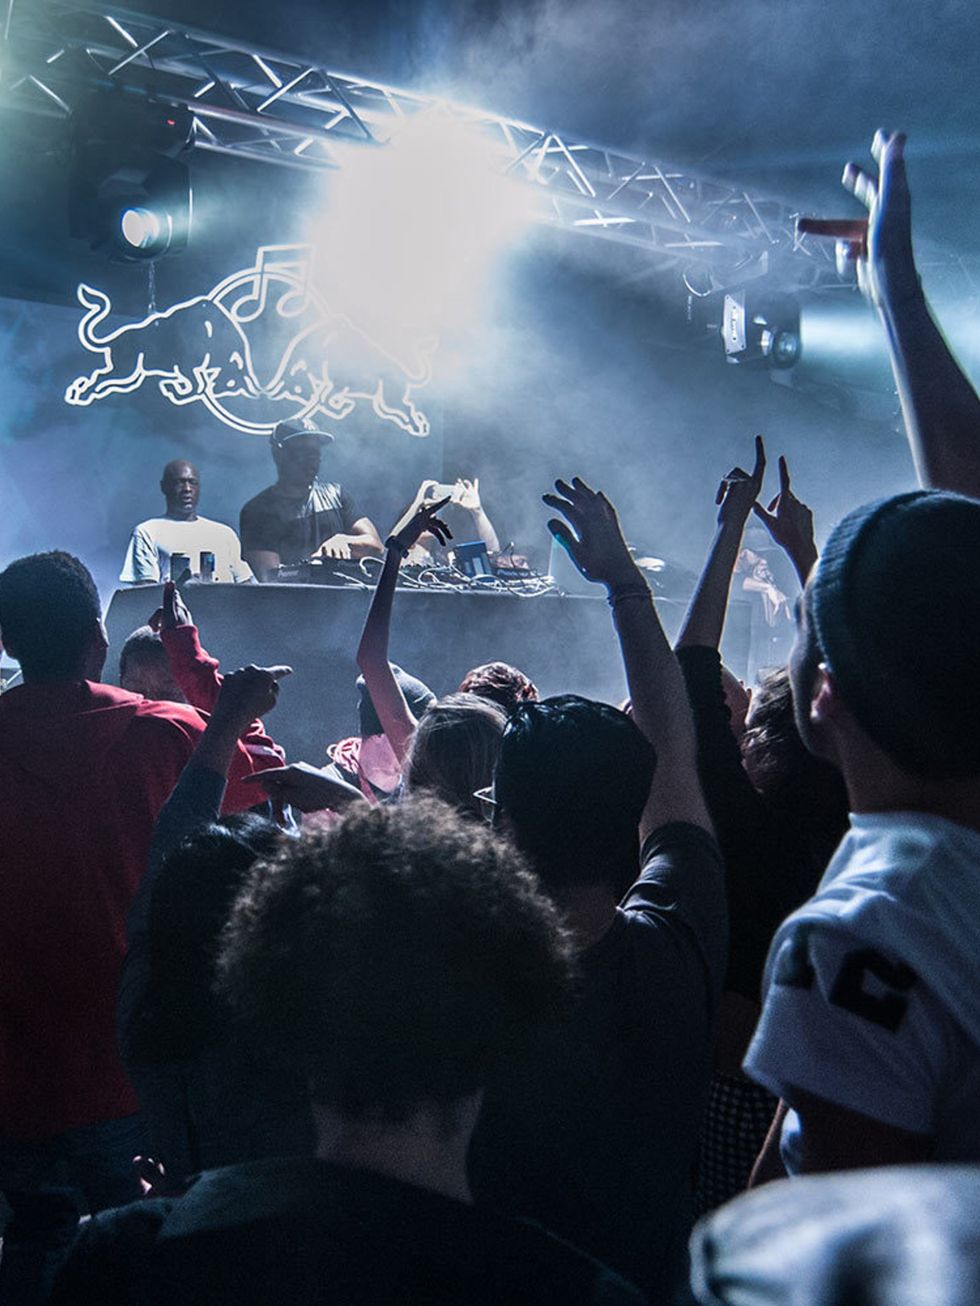 <p>NIGHTLIFE: RBMA Secret Rave</p>

<p>If there's one thing that Red Bull know how to do (other than keep us caffeinated), it's throw a party. And the good news is, they're at it again this Friday. Taking over a mystery location somewhere within the M25, 